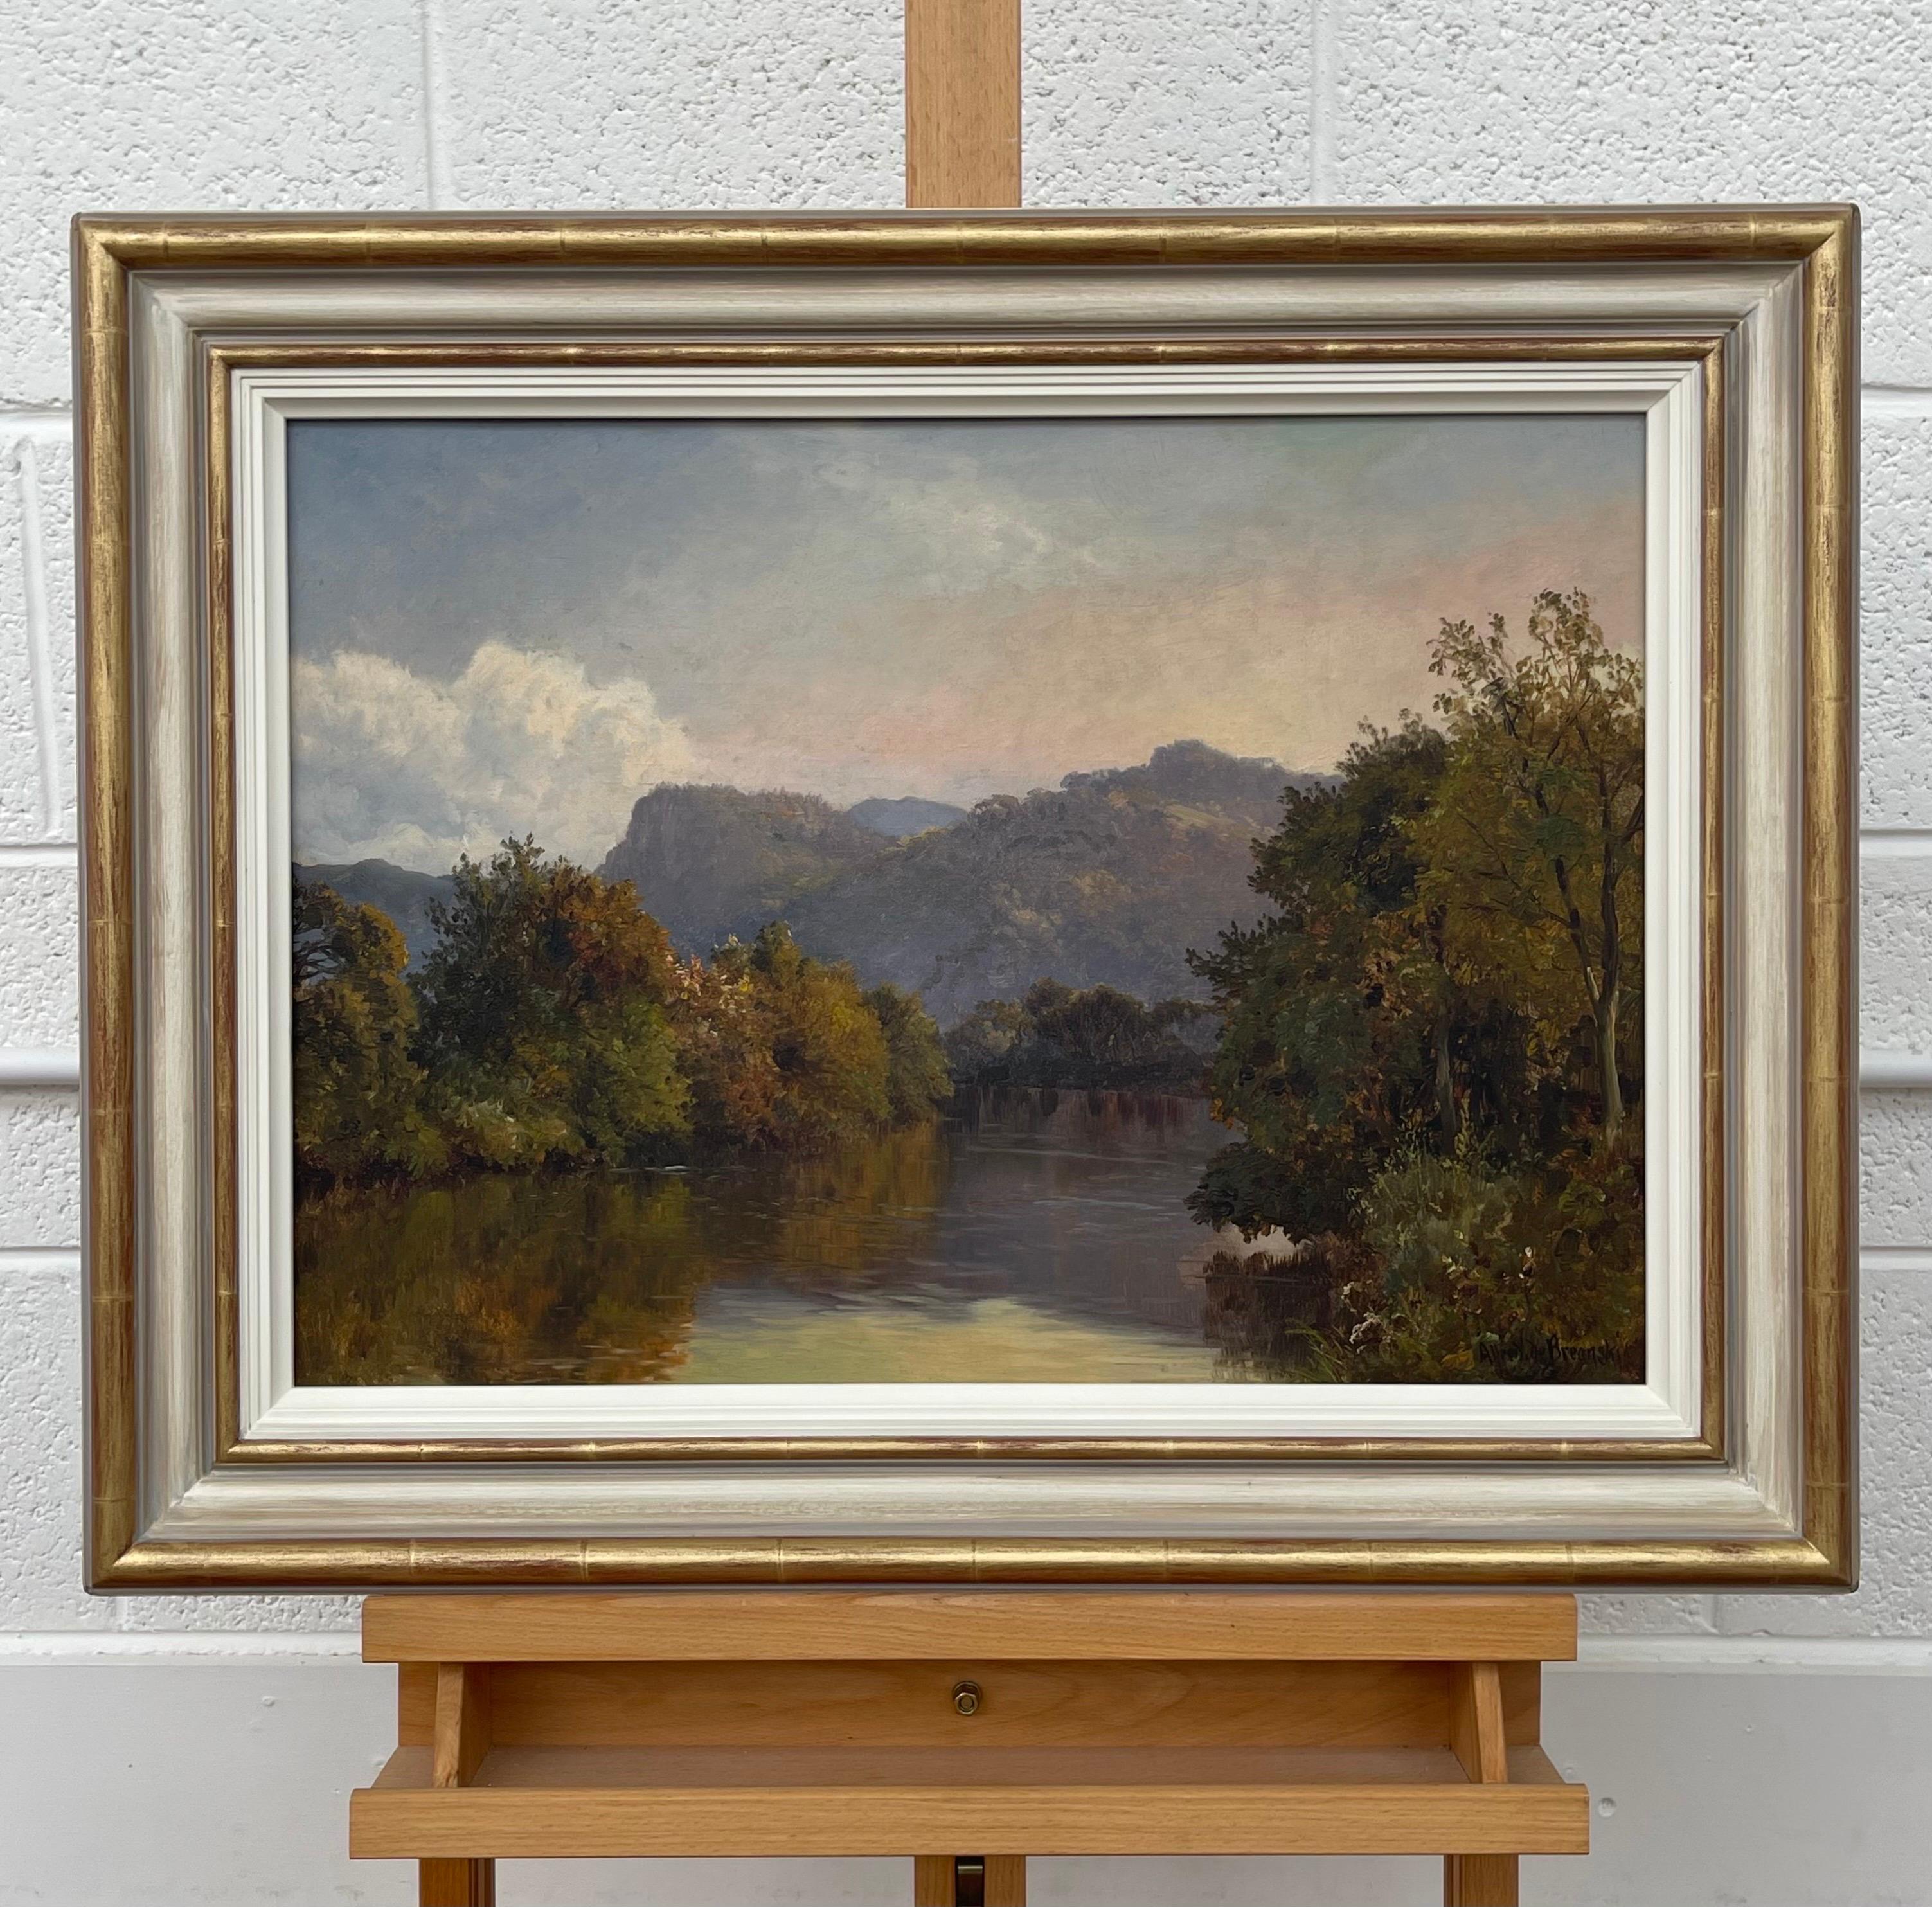 River Landscape Painting of the Scottish Highlands by 19th Century British Artist, Alfred De Breanski Snr, (1852 - 1928). Signed on the front (lower right). Framed in a brand new hand-finished moulding of the highest quality. 

Art measures 22 x 16